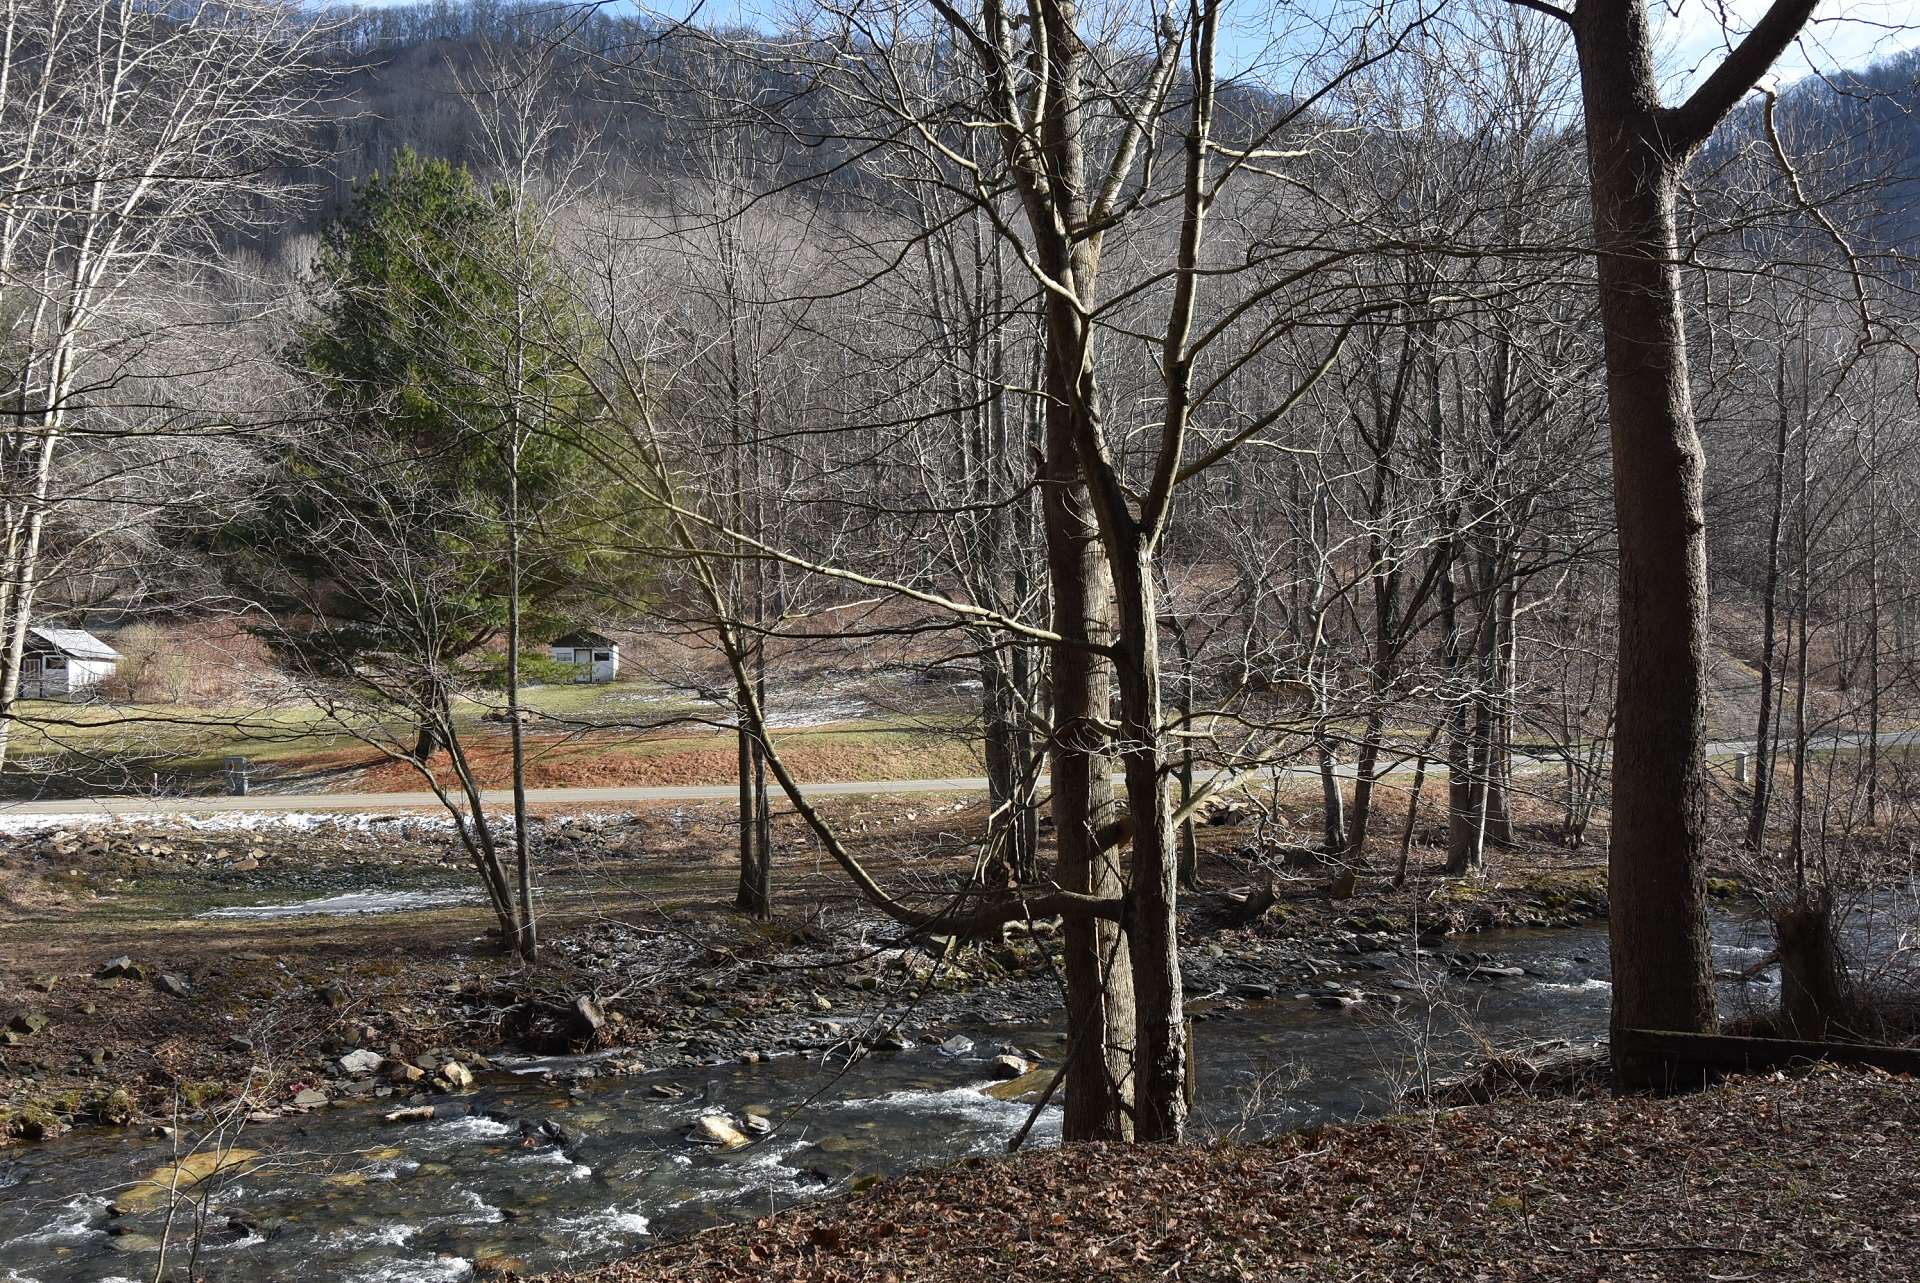 The site overlooks the creek. Imagine relaxing on the porch with the sounds of the creek. Three Top creek is a hatchery supported trout stream.